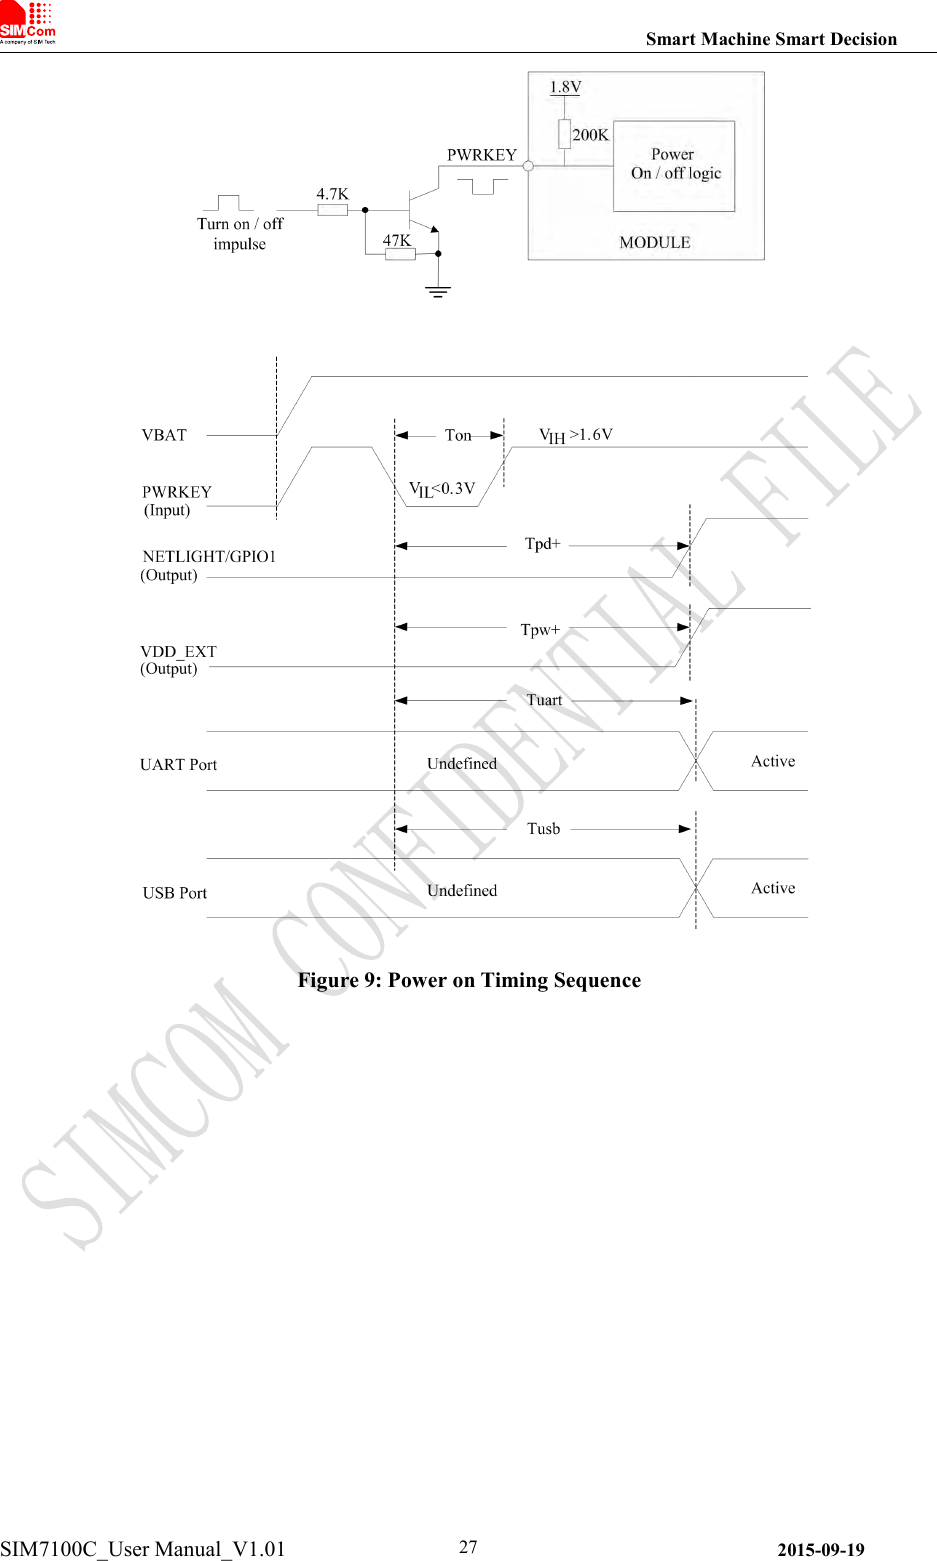 Smart Machine Smart DecisionSIM7100C_User Manual_V1.01 2015-09-1927Figure 9: Power on Timing Sequence